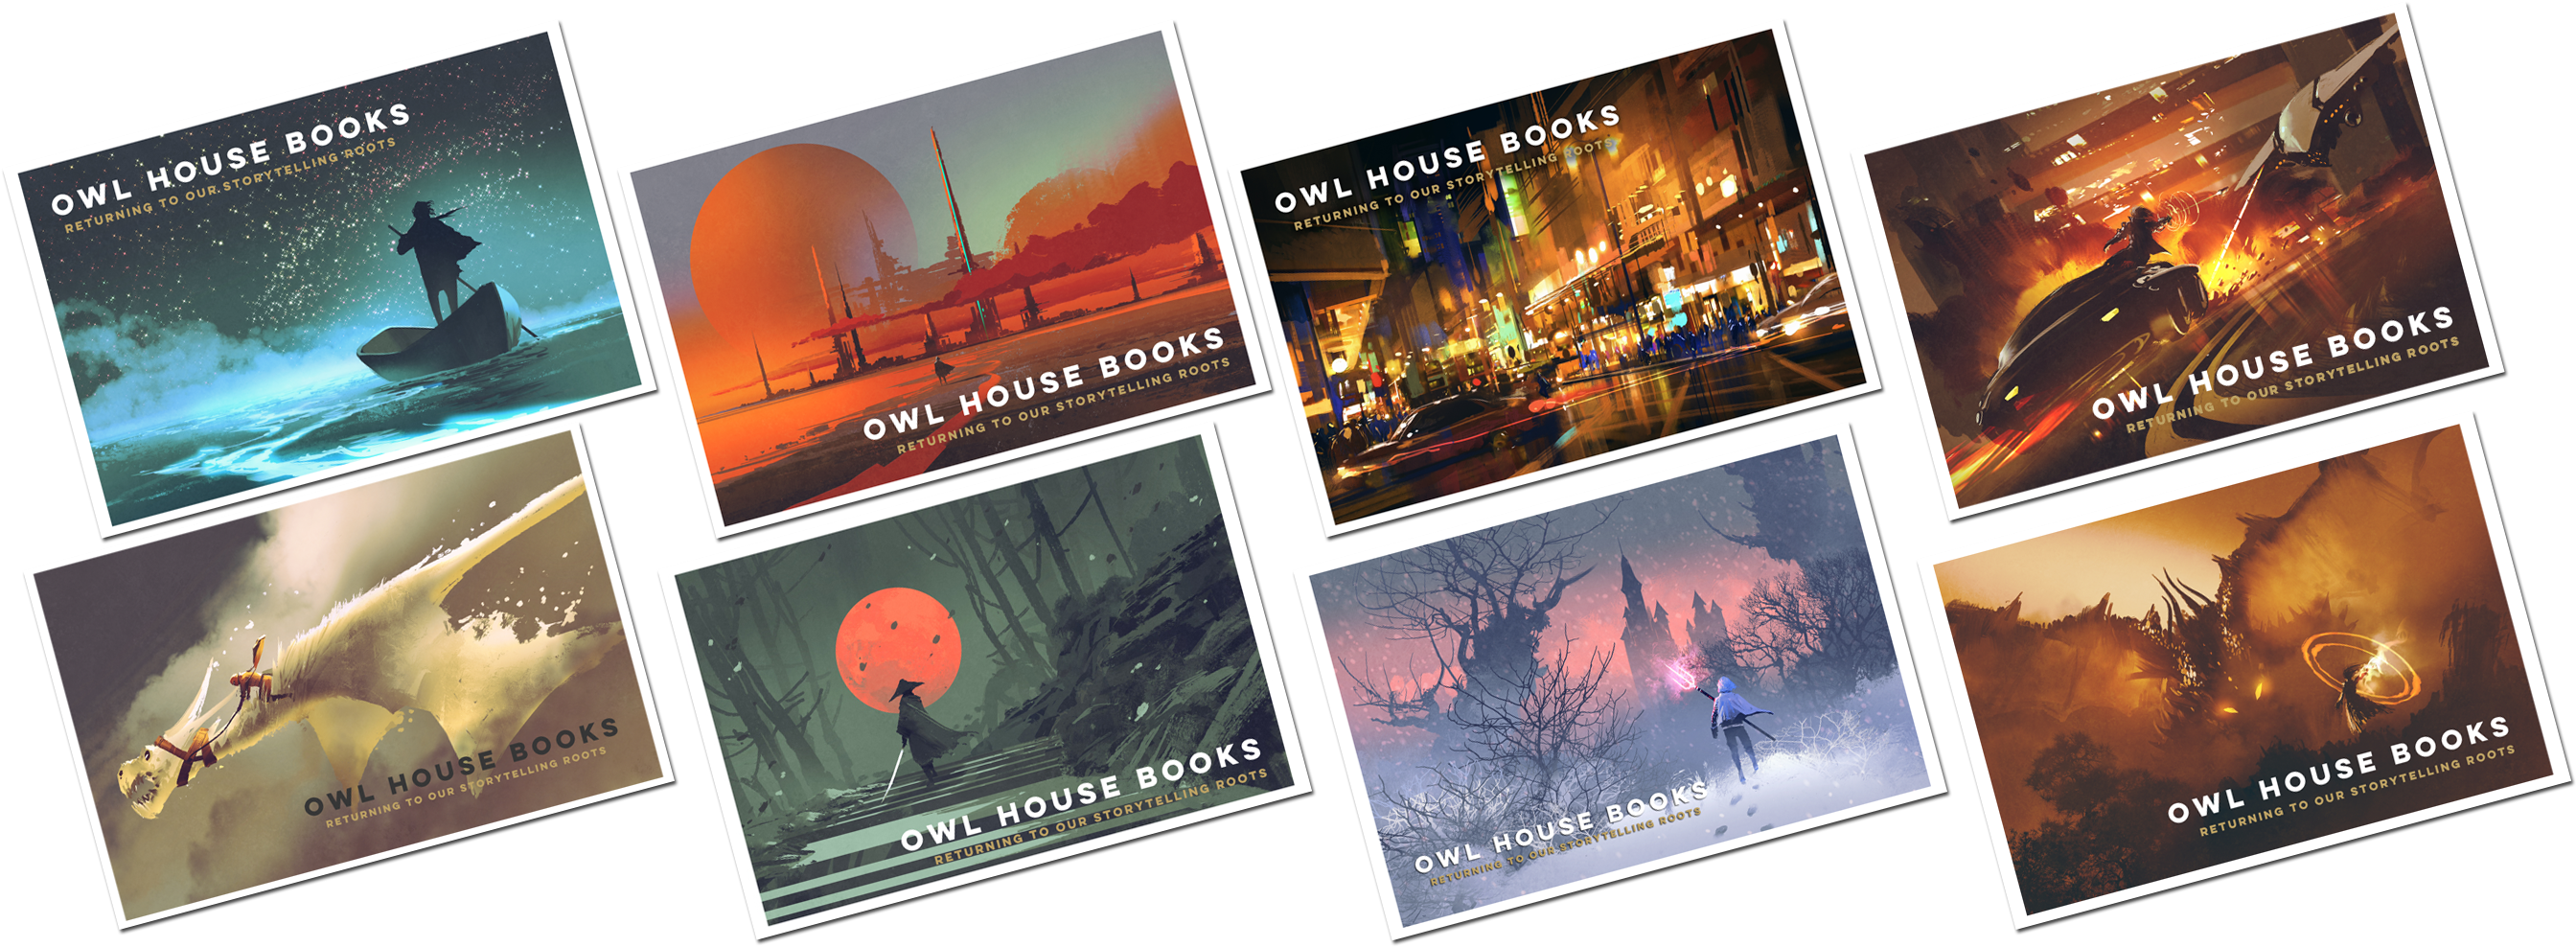 Owl House Books Postcard Collection